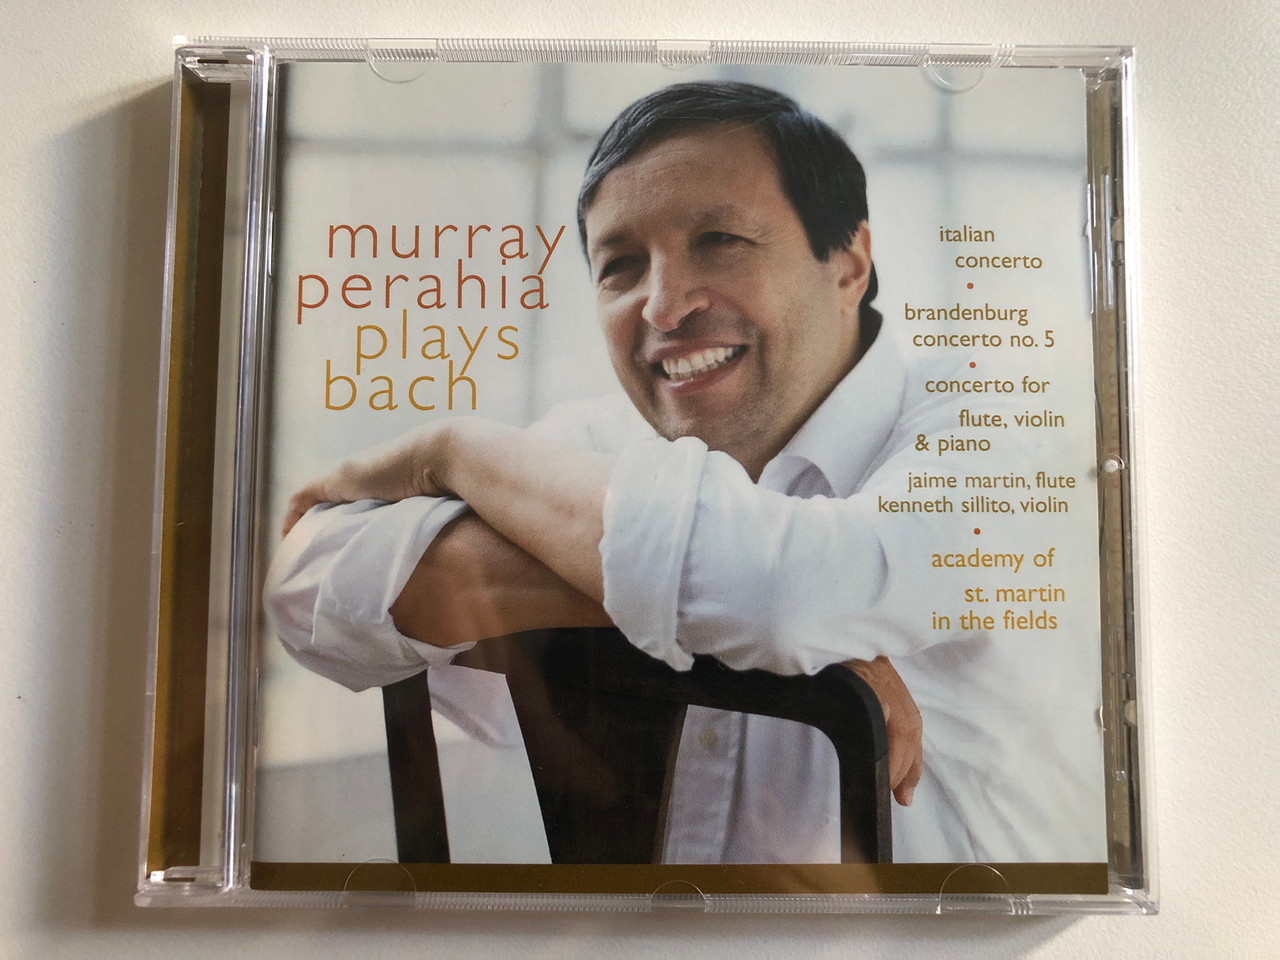 https://cdn10.bigcommerce.com/s-62bdpkt7pb/products/0/images/313482/Murray_Perahia_Plays_Bach_-_Italian_Concerto_Brandenburg_Concerto_No._5_Concerto_For_Flute_Violin_Piano_Jaime_Martin_flute_Kenneth_Sillito_violin_Academy_Of_St._Martin_In_The_Fi_1__14920.1700843561.1280.1280.JPG?c=2